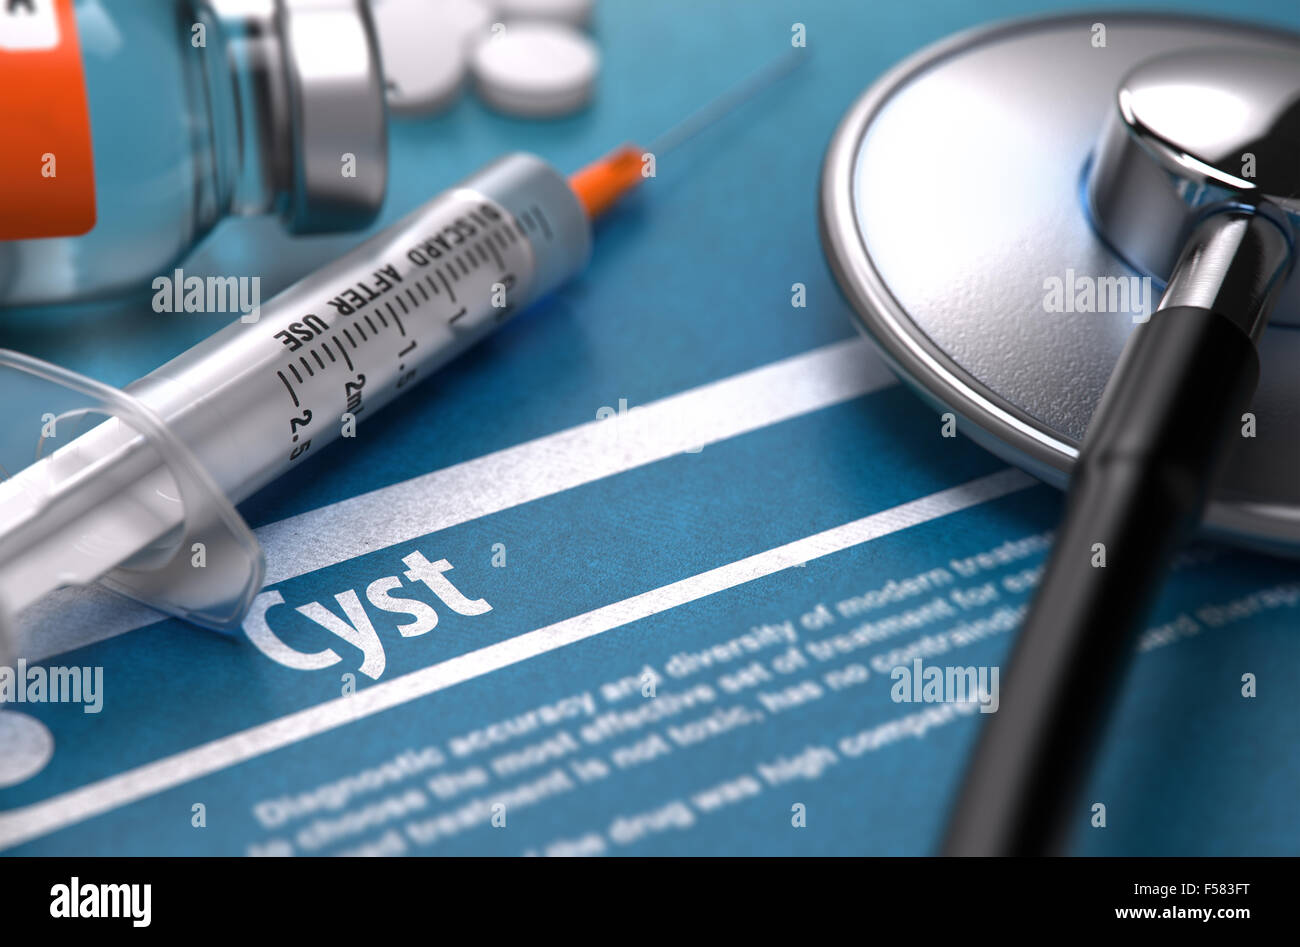 Cyst - Printed Diagnosis on Blue Background and Medical Composition - Stethoscope, Pills and Syringe. Medical Concept. Blurred I Stock Photo